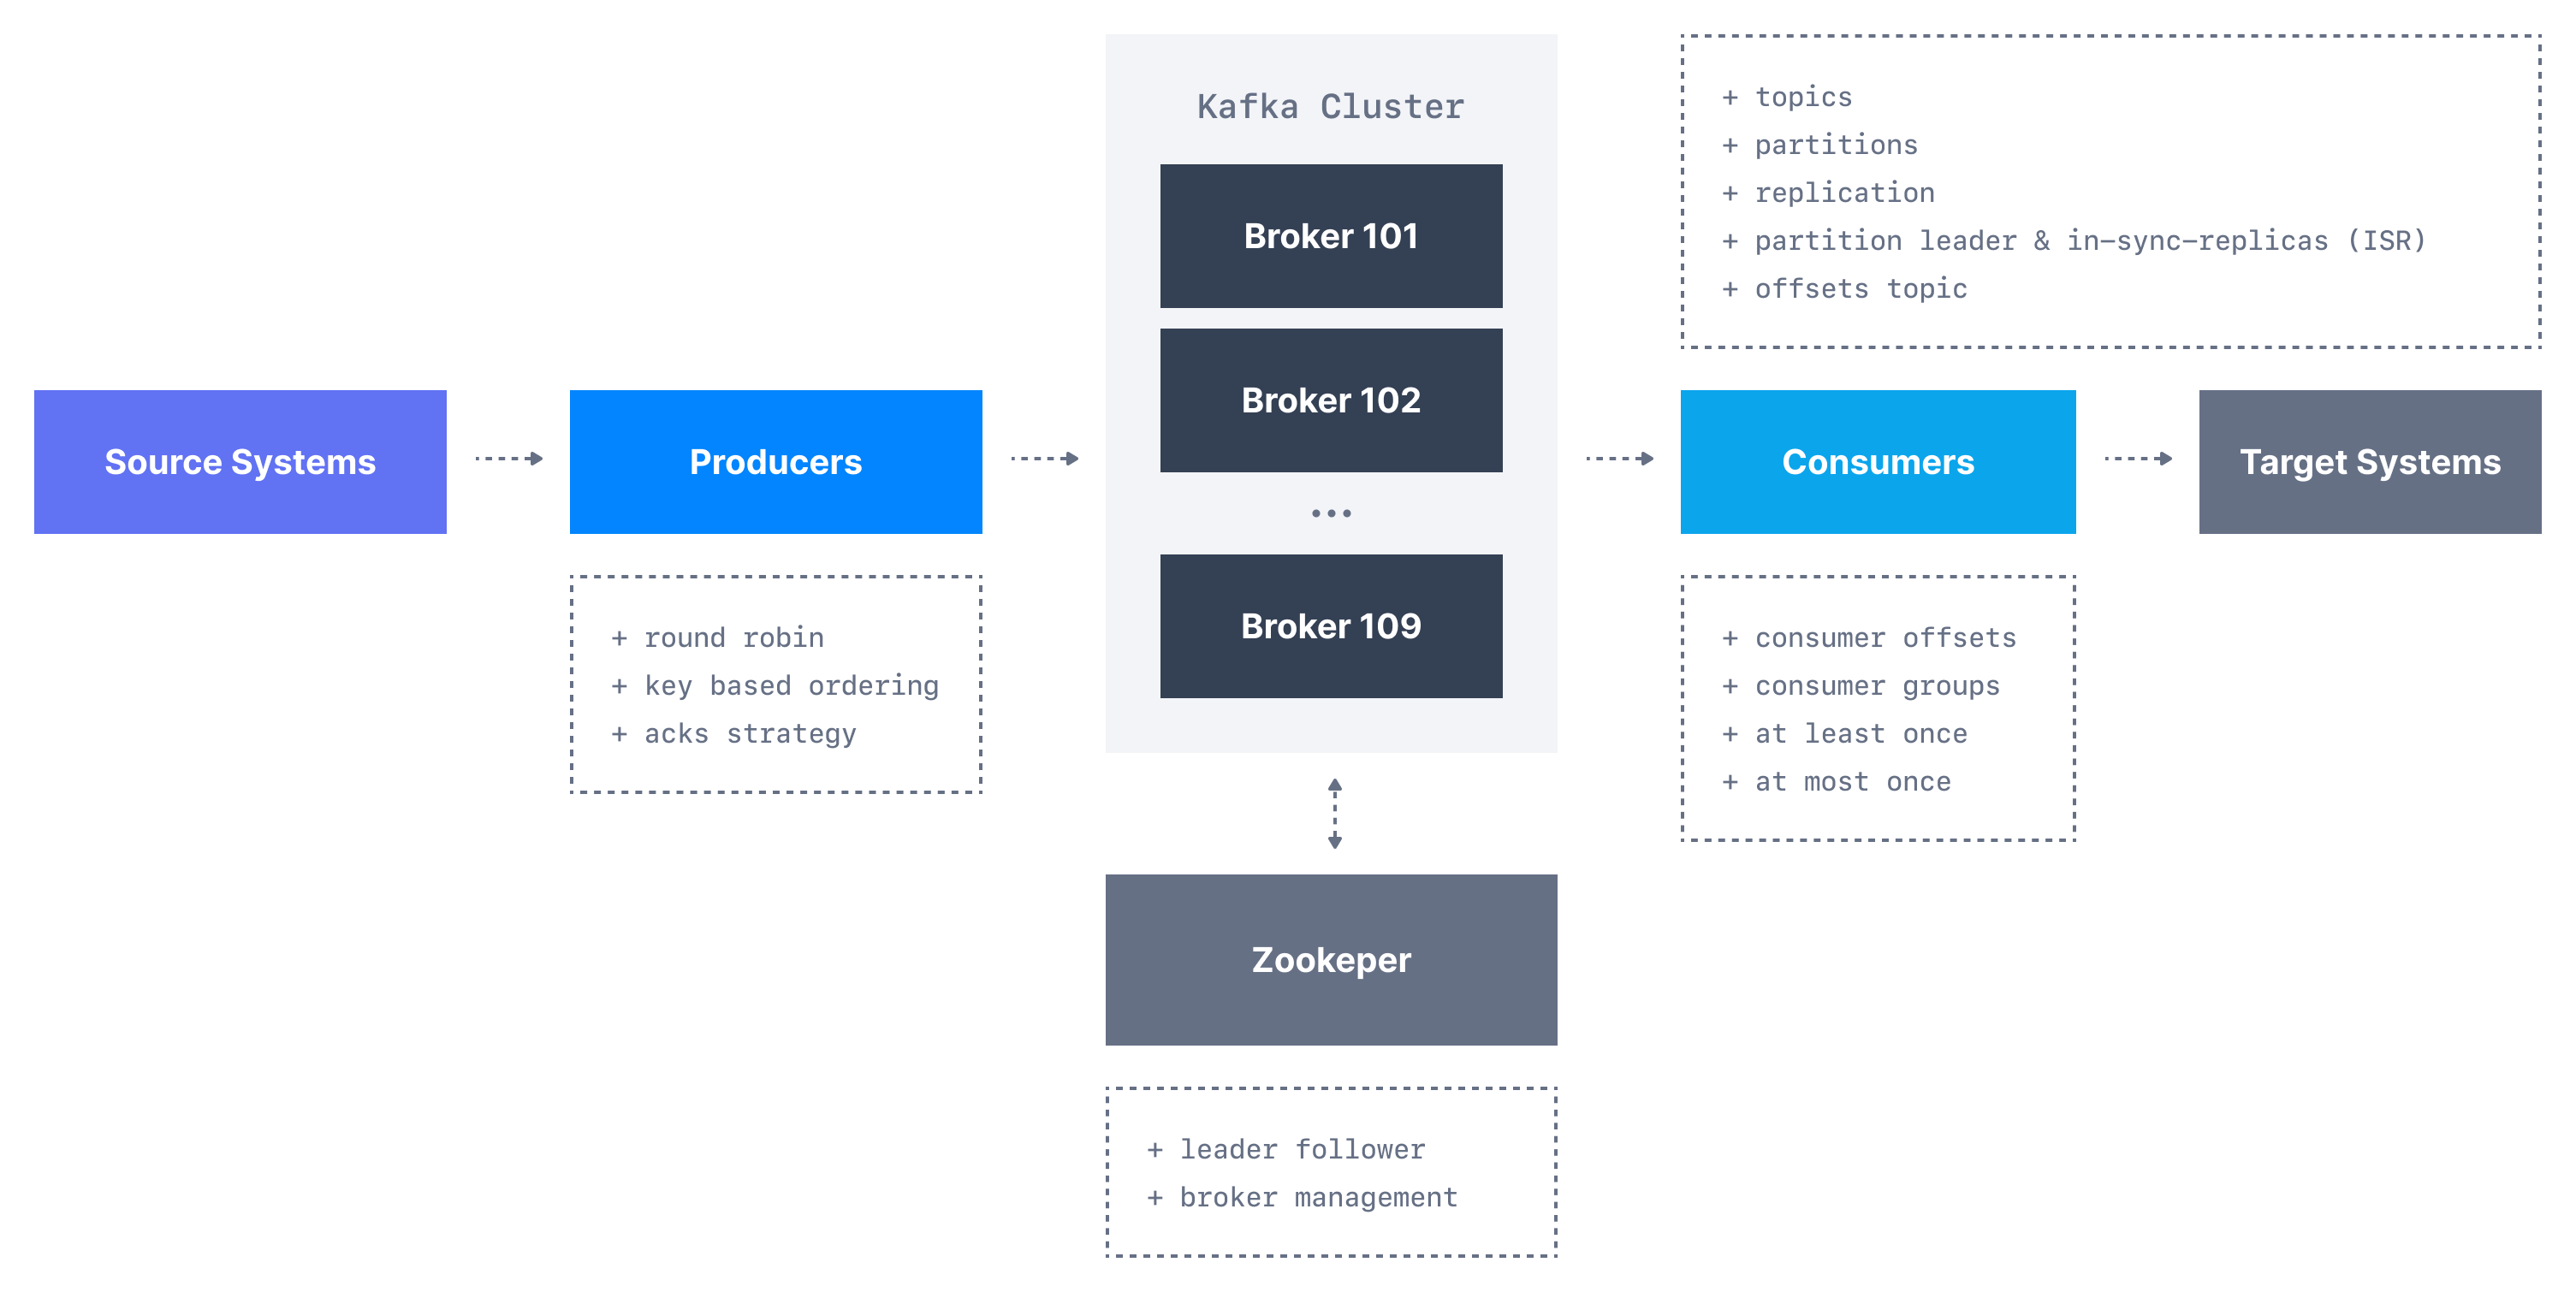 Apache Kafka clusters are made up of several core components. This diagrams shows the relationships between brokers, zookeeper, producers, consumers, source systems and target systems.